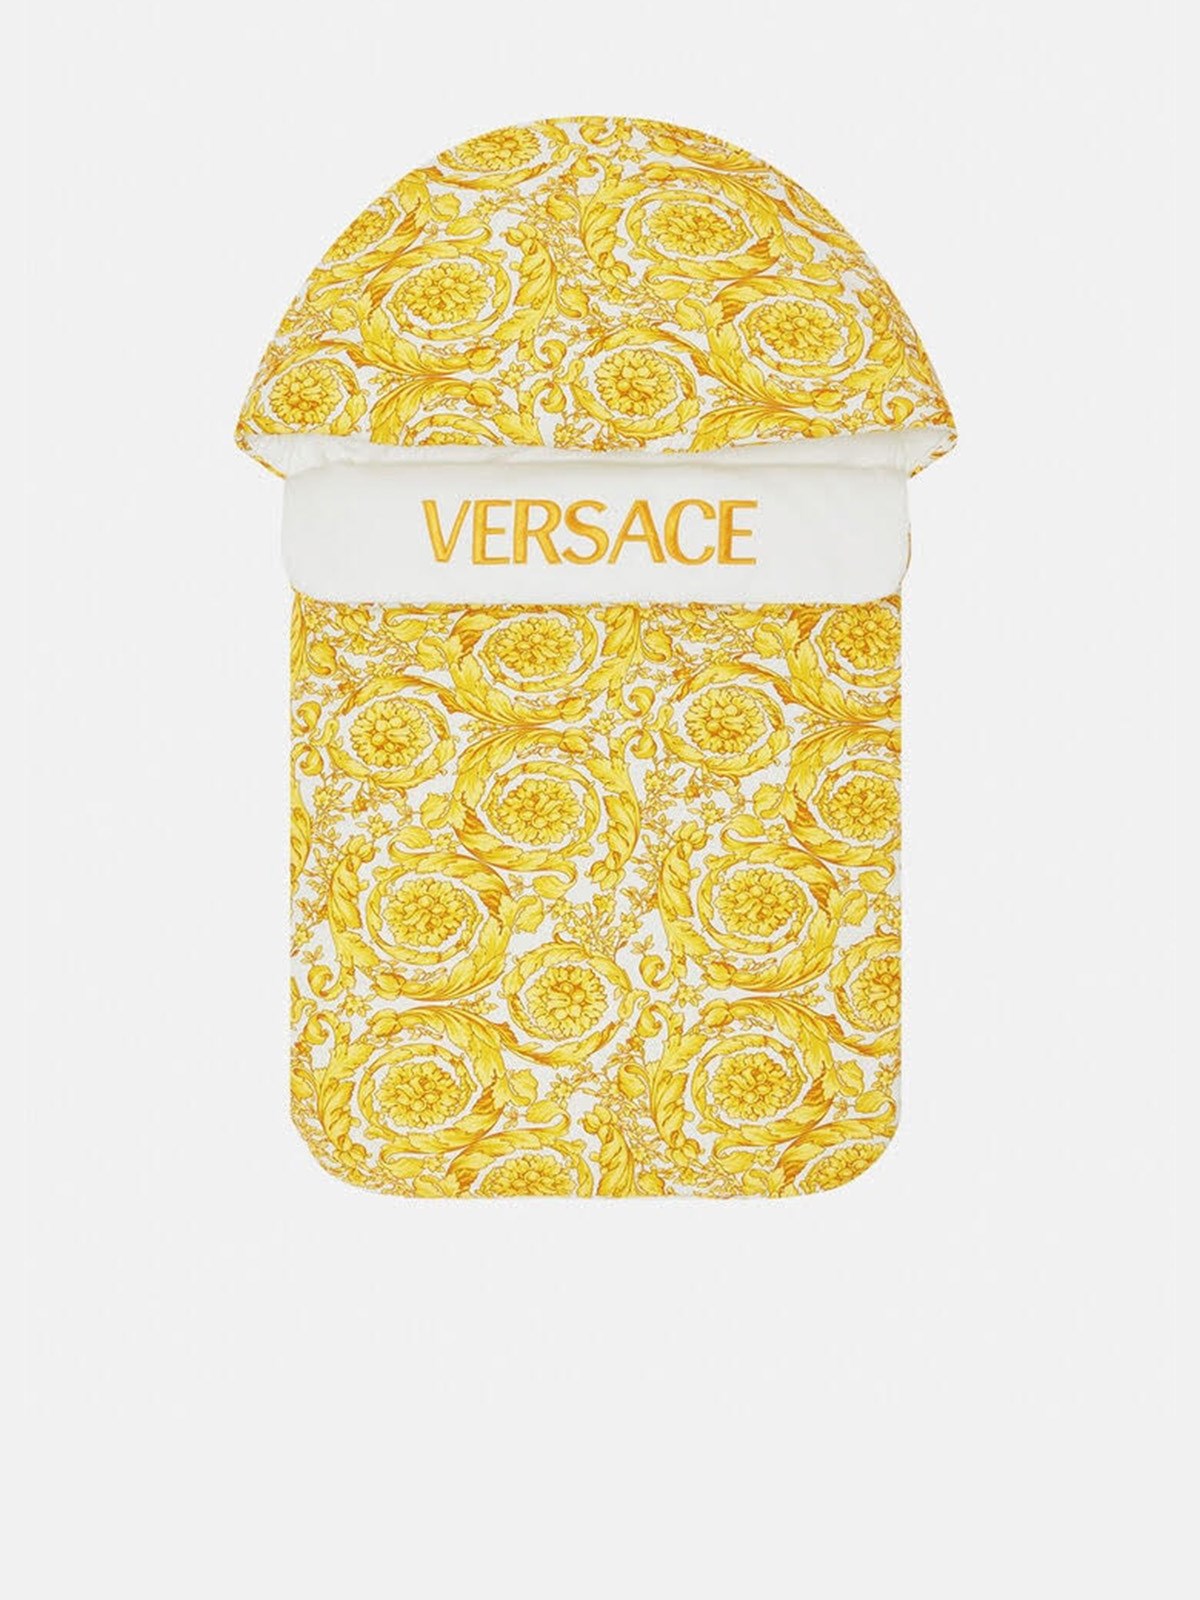 Versace Baroque Sleeping Bag In White And Gold Cotton